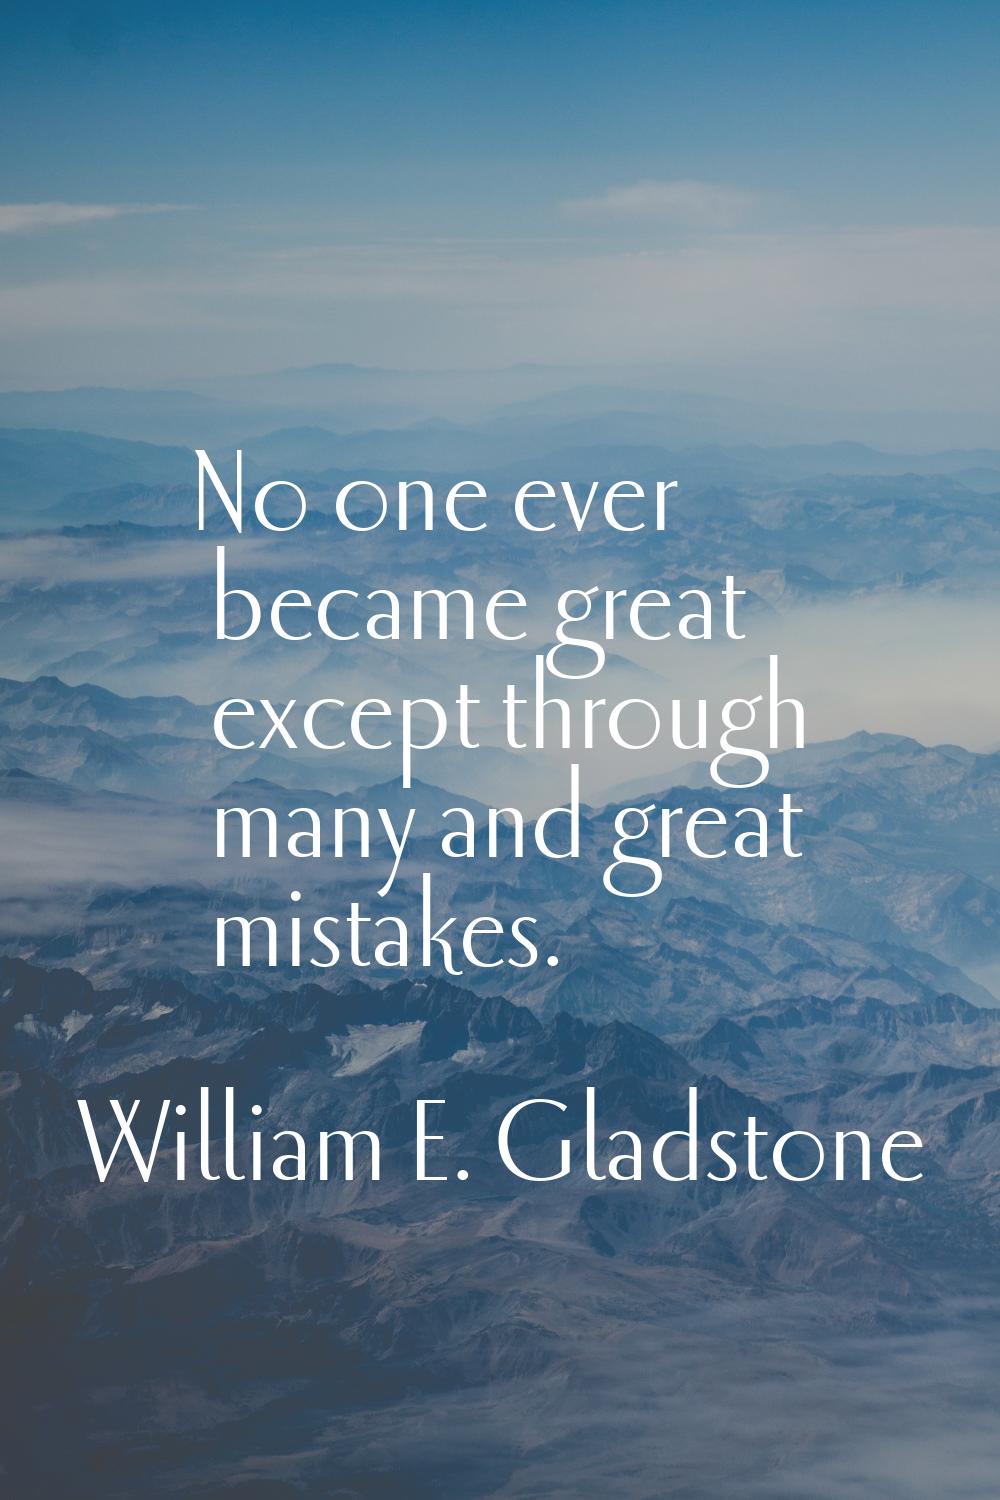 No one ever became great except through many and great mistakes.